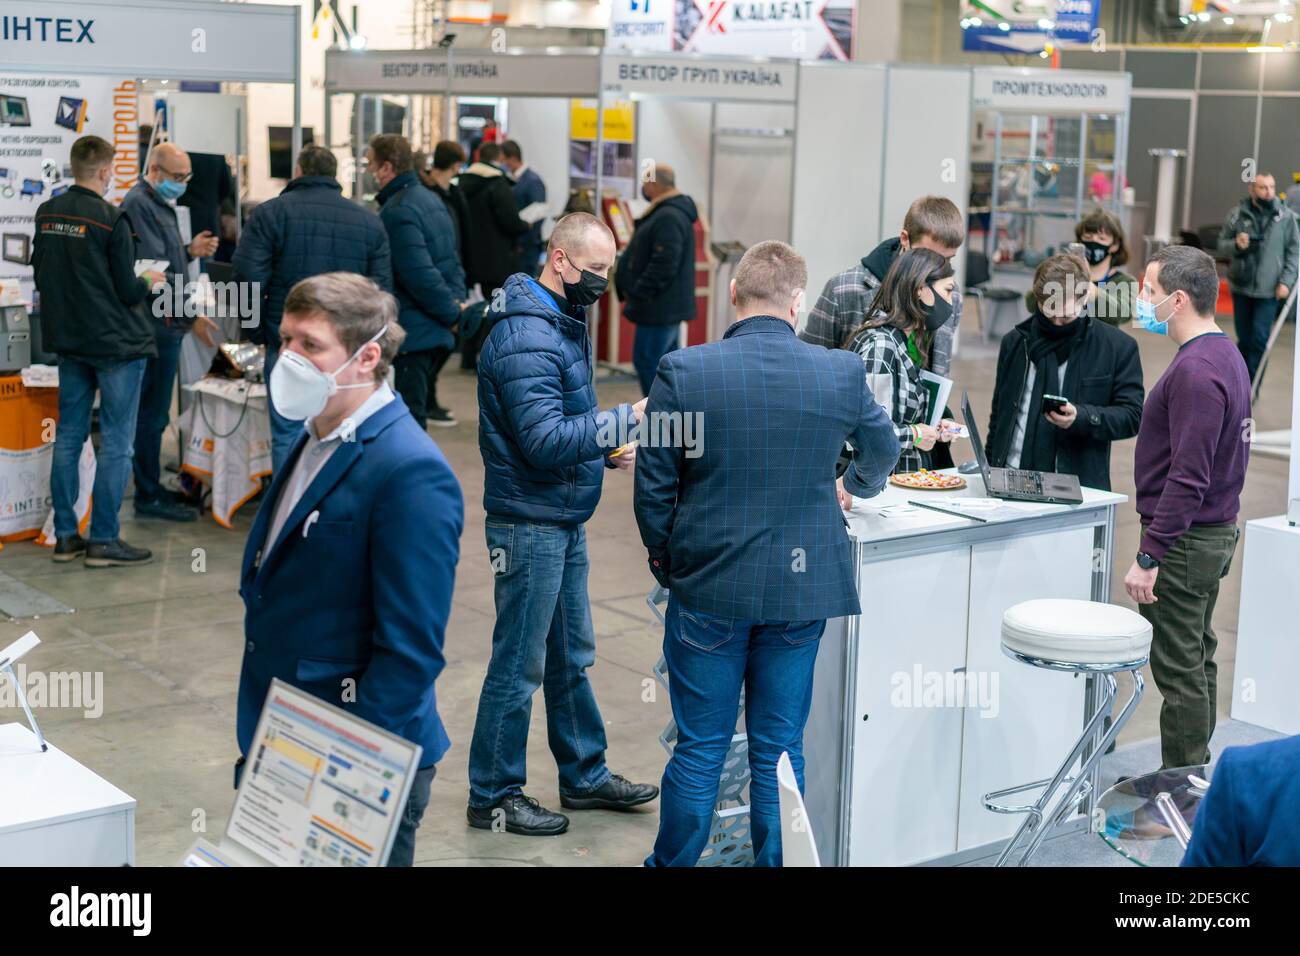 Kiev, Ukraine November 25 2020. Industrial Exhibition during a pandemic. People at the exhibition wearing medical masks. Exhibition and social Stock Photo